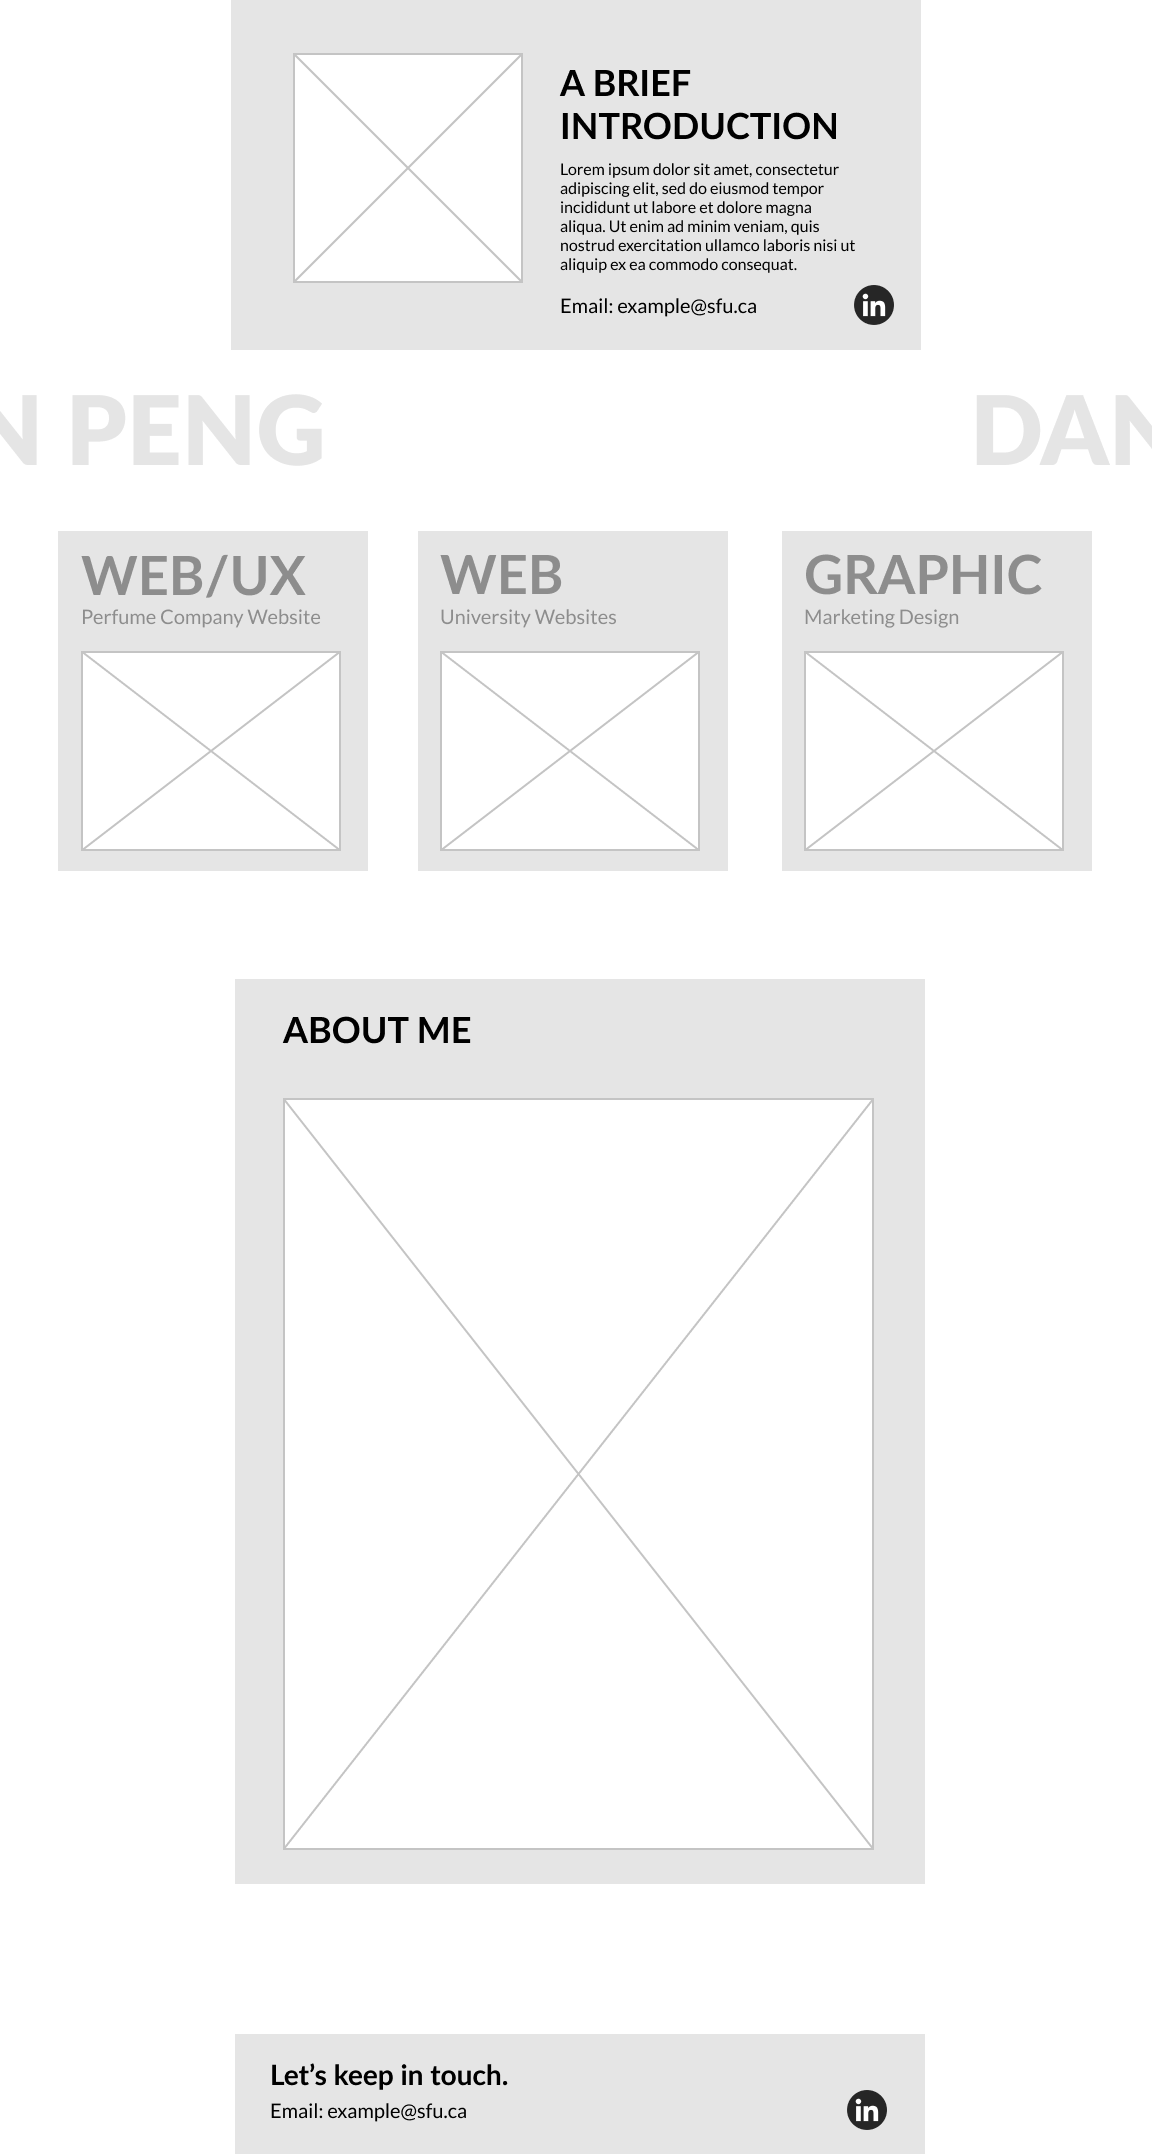 The wireframe of landing page